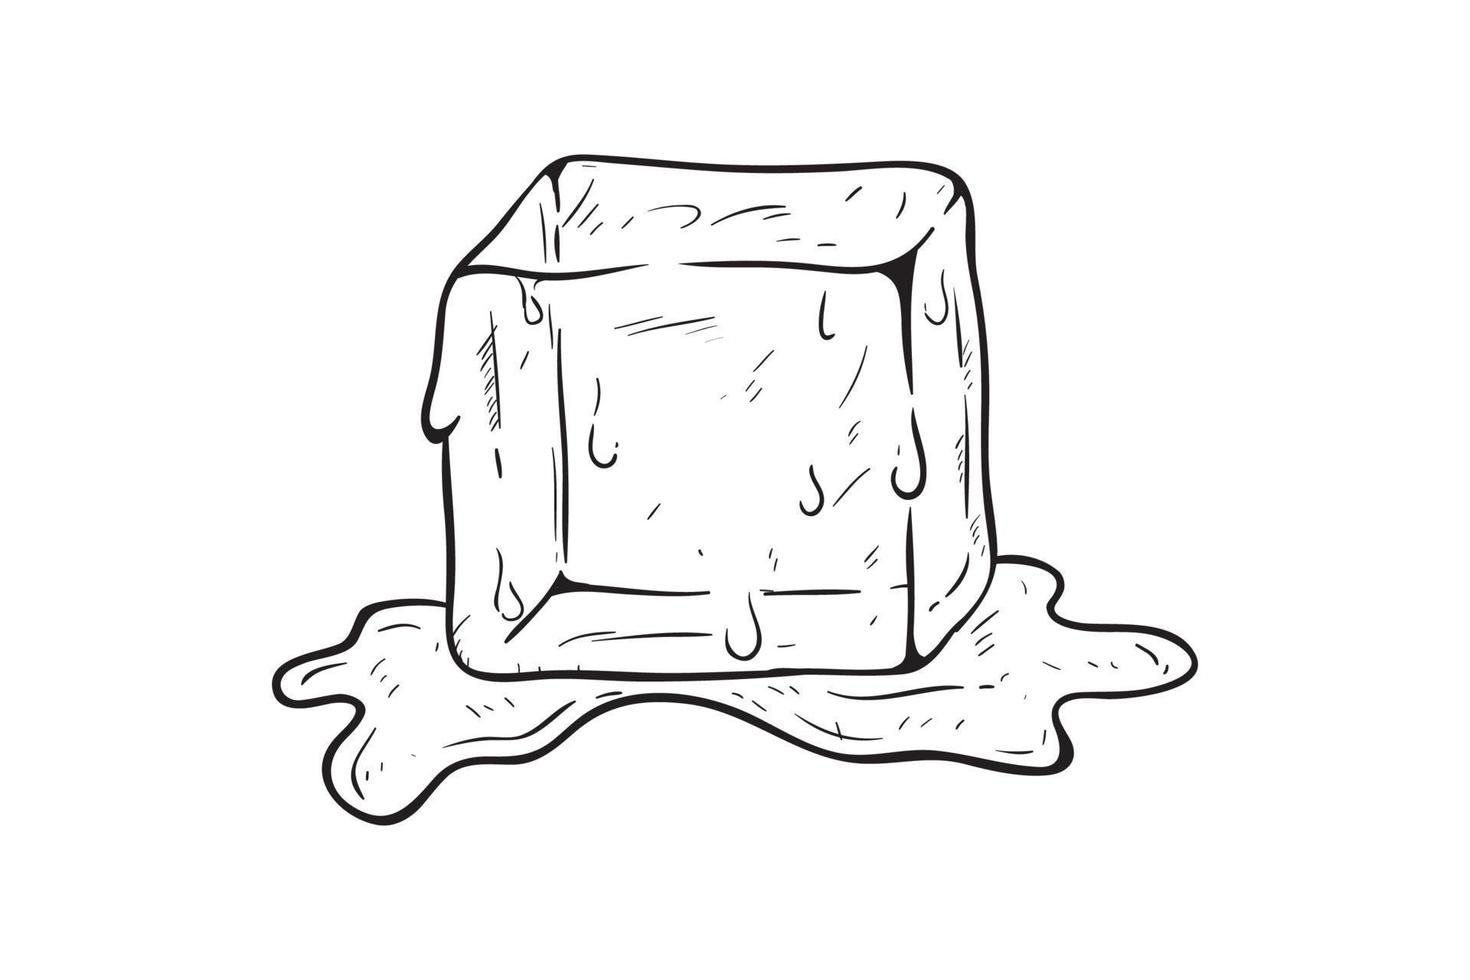 melted ice cubes with hand drawing style vector